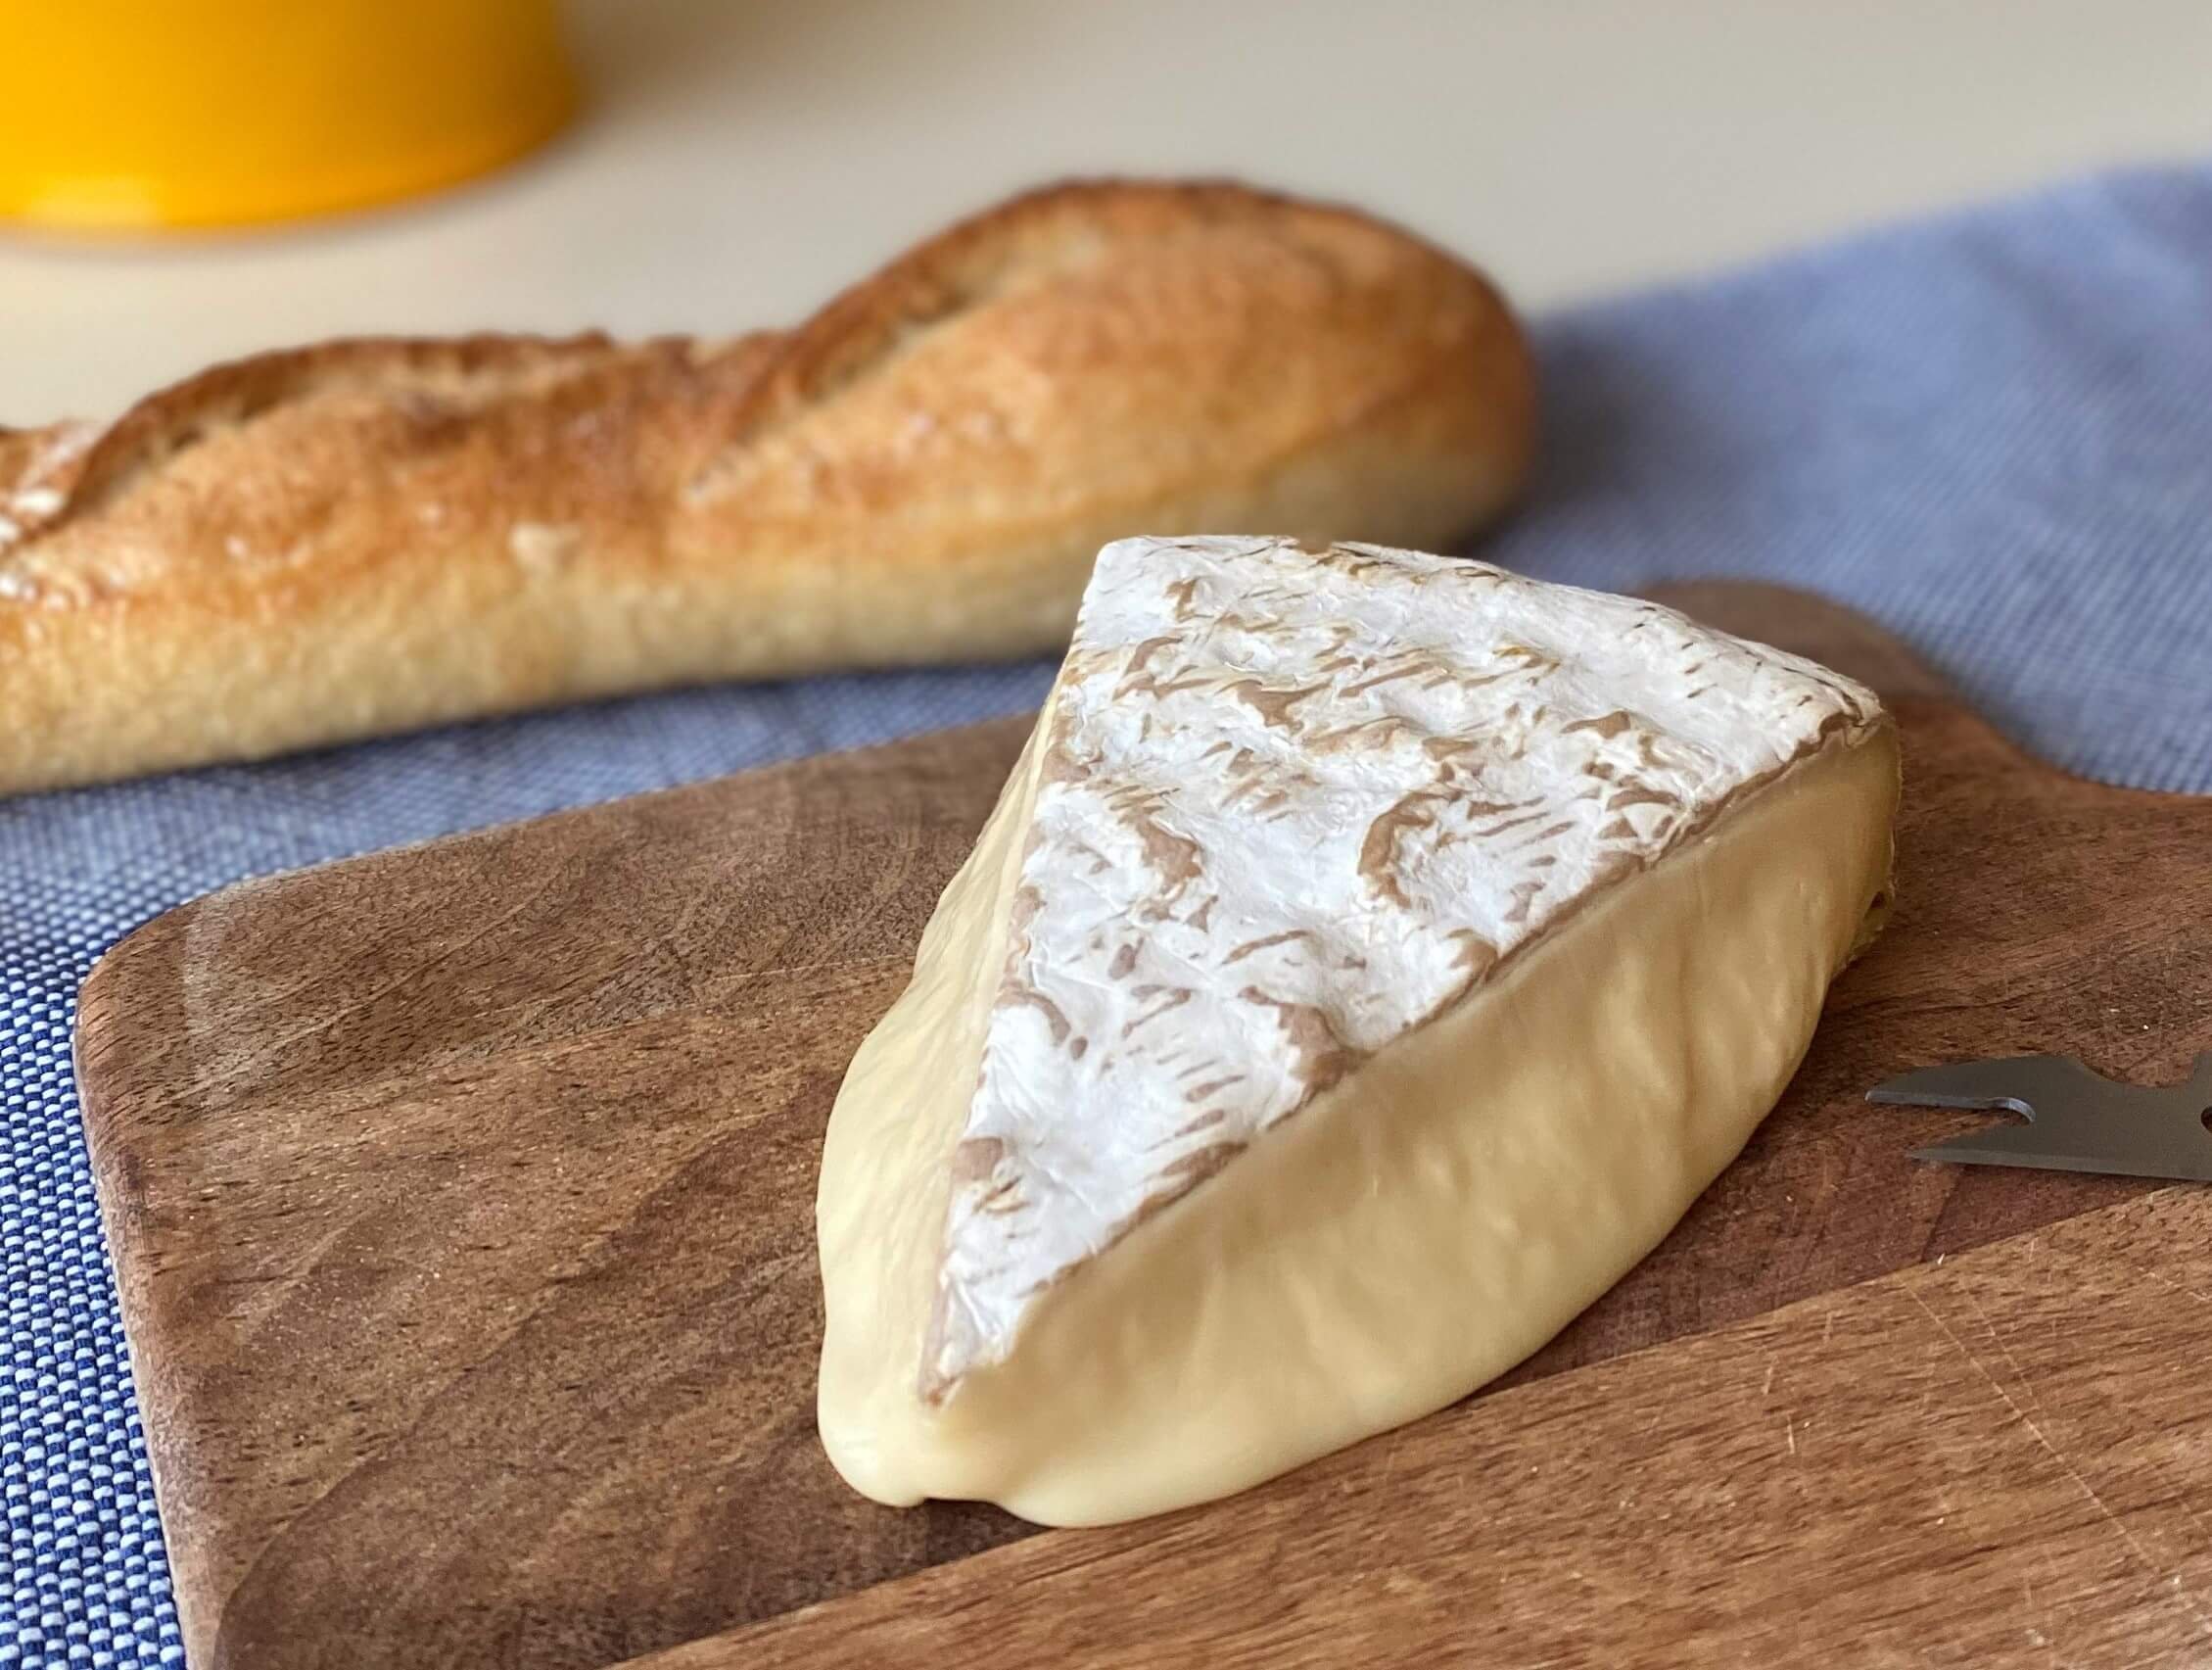 Brie 101: What's in A Name? When it Comes to Brie, Everything!